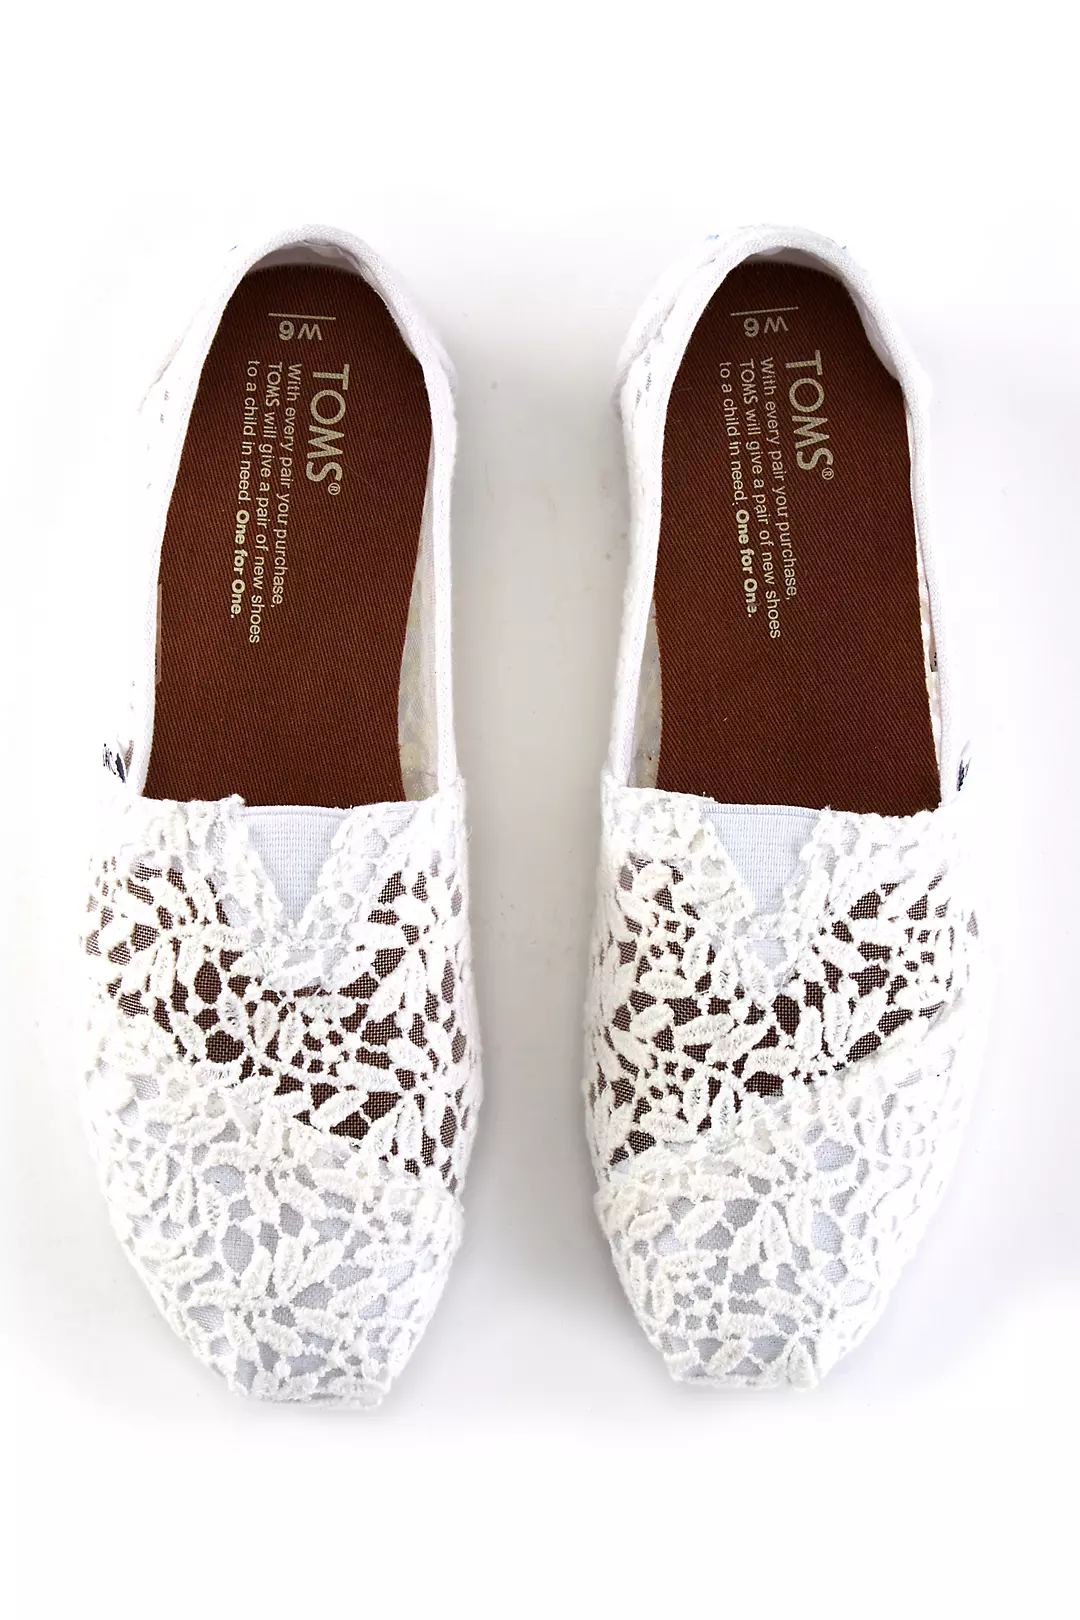 TOMS Lace Leaves Classic Slip-On Shoes Image 3